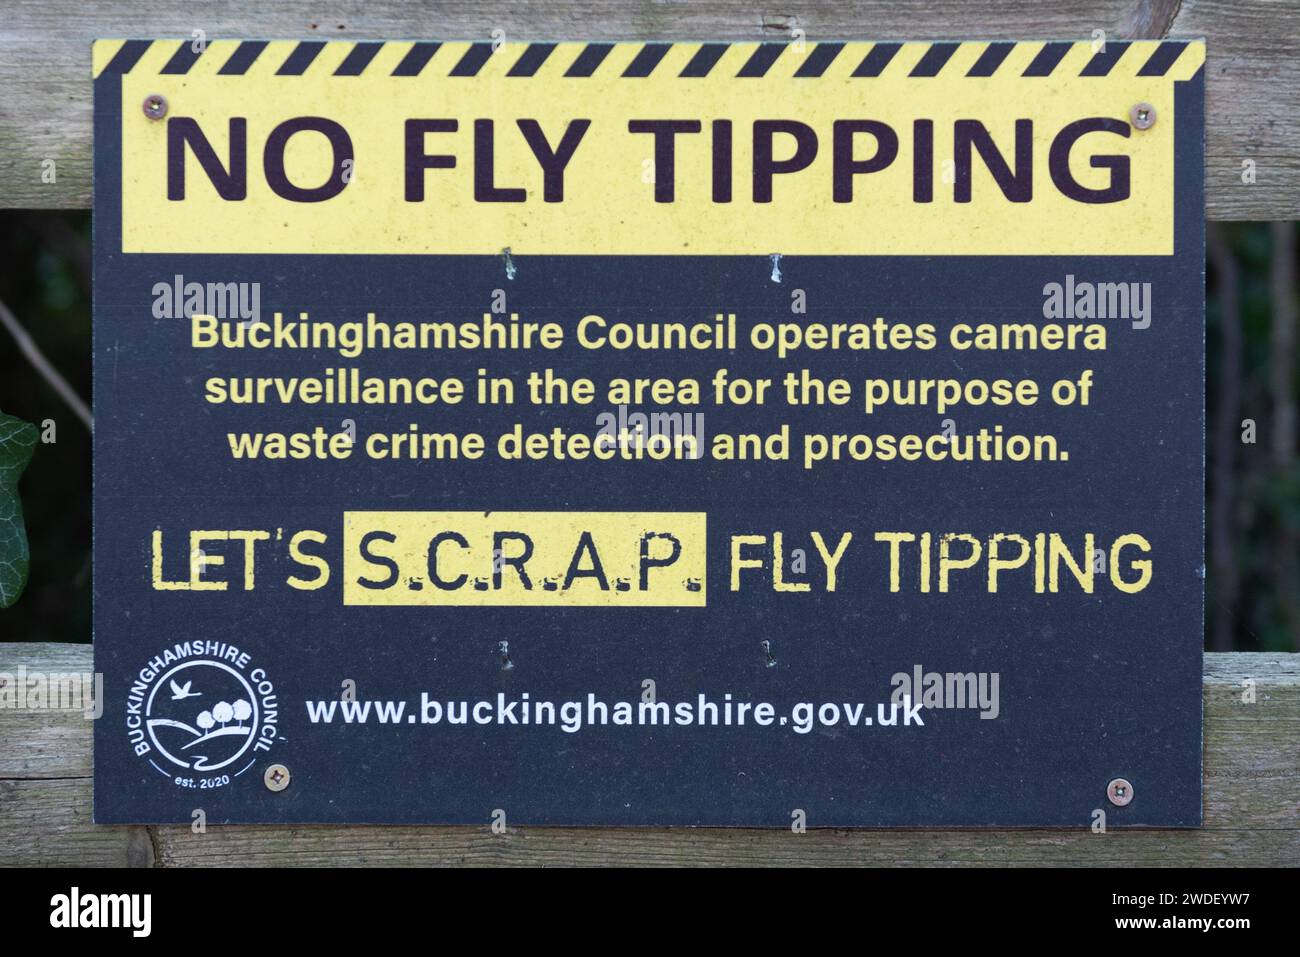 No Fly Tipping Sign by the Buckinghamshire Council, Lets S.C.R.A.P Fly Tipping Stock Photo